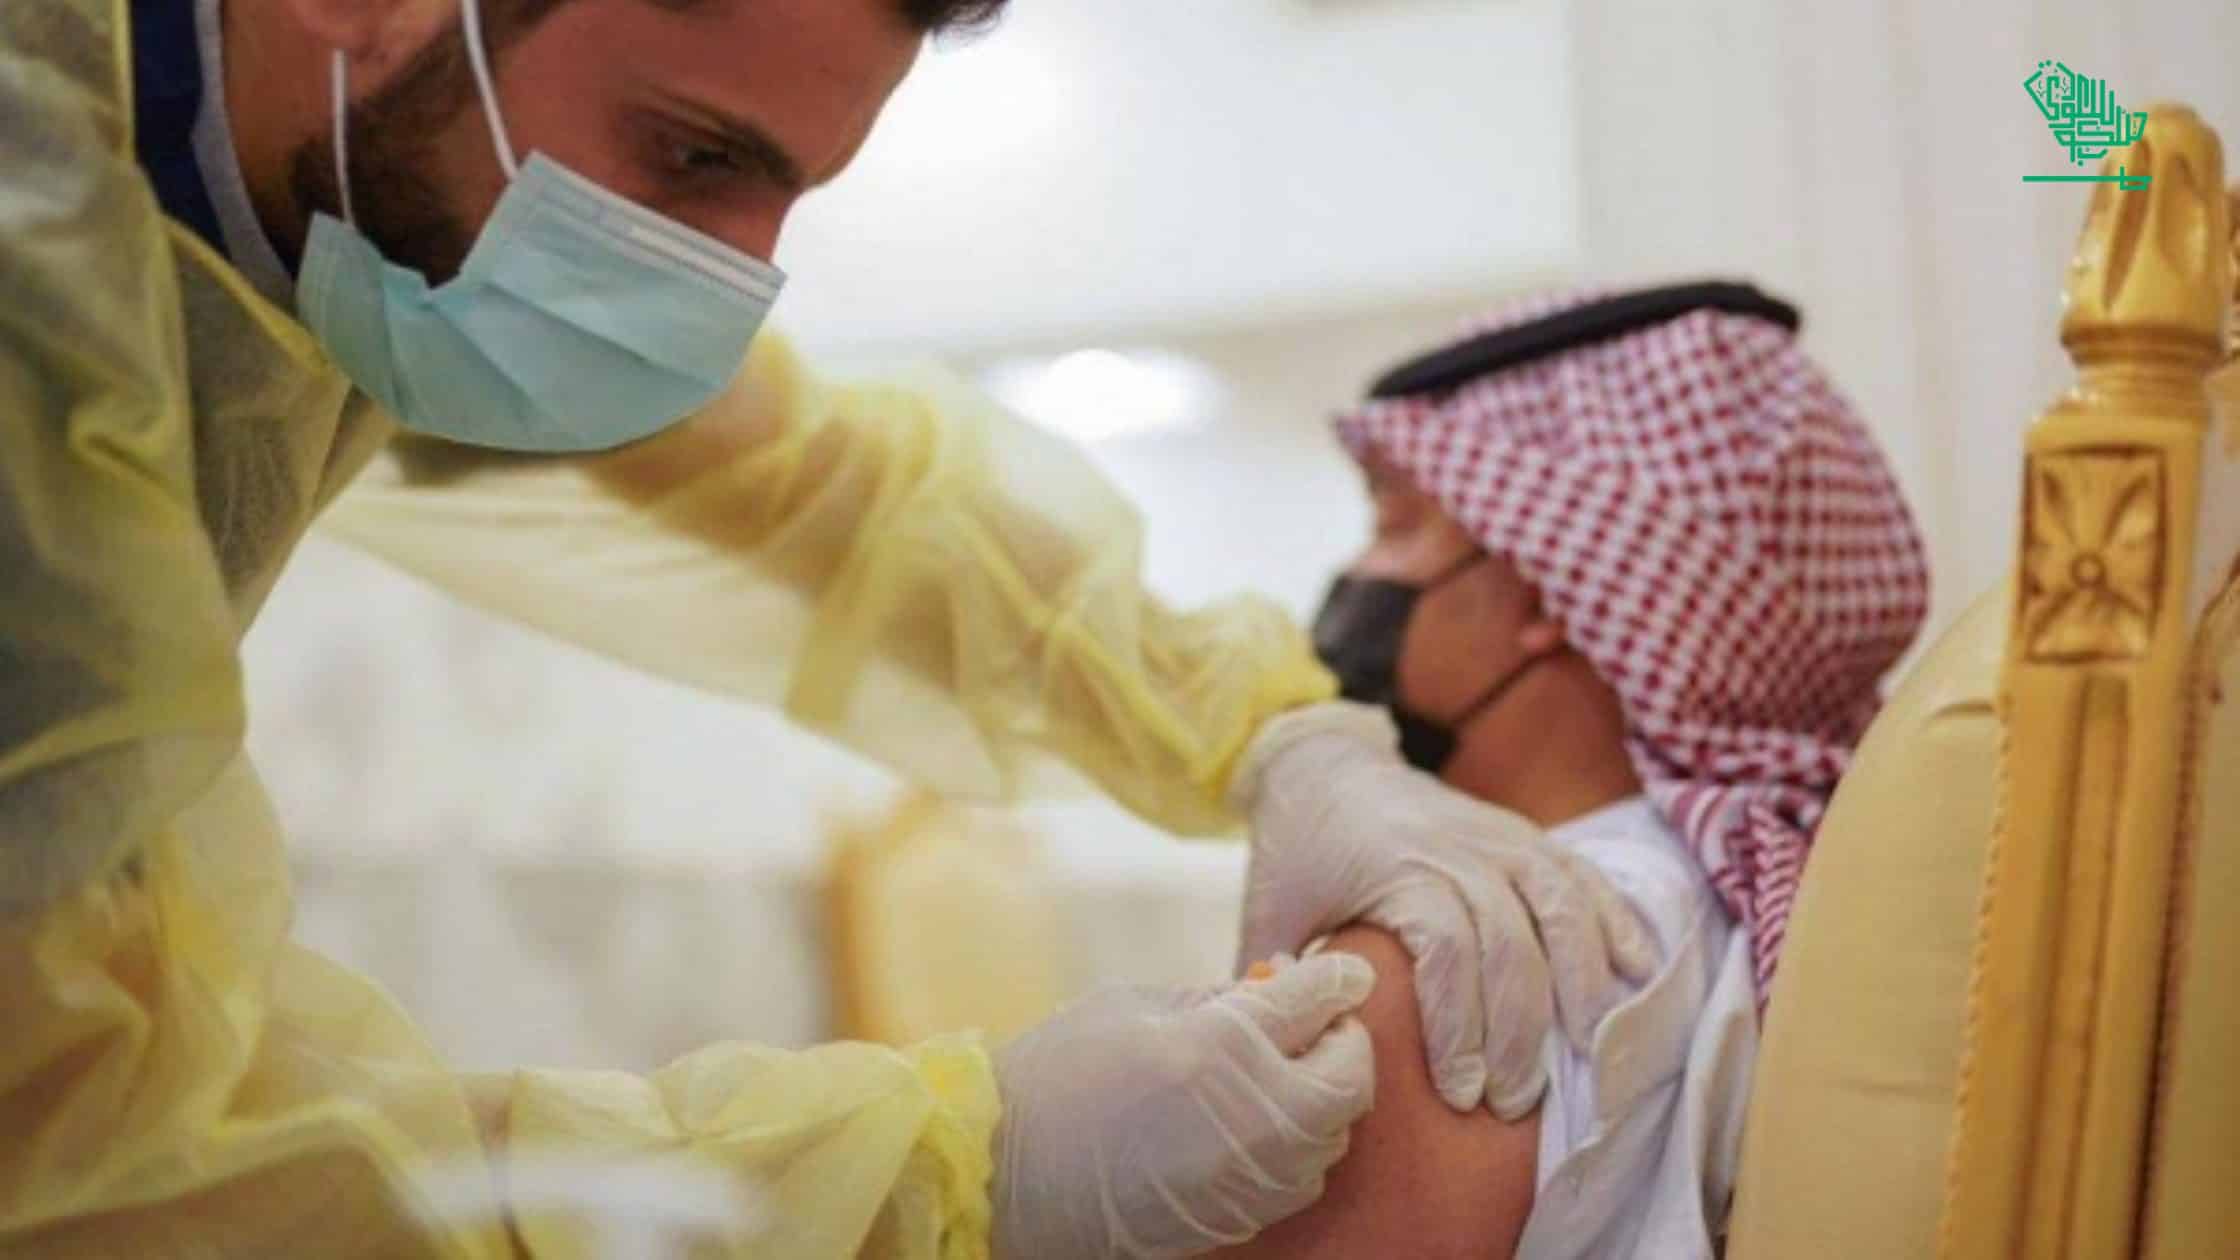 Second Dose of Vaccine Available in Saudi Arabia For People Over 40